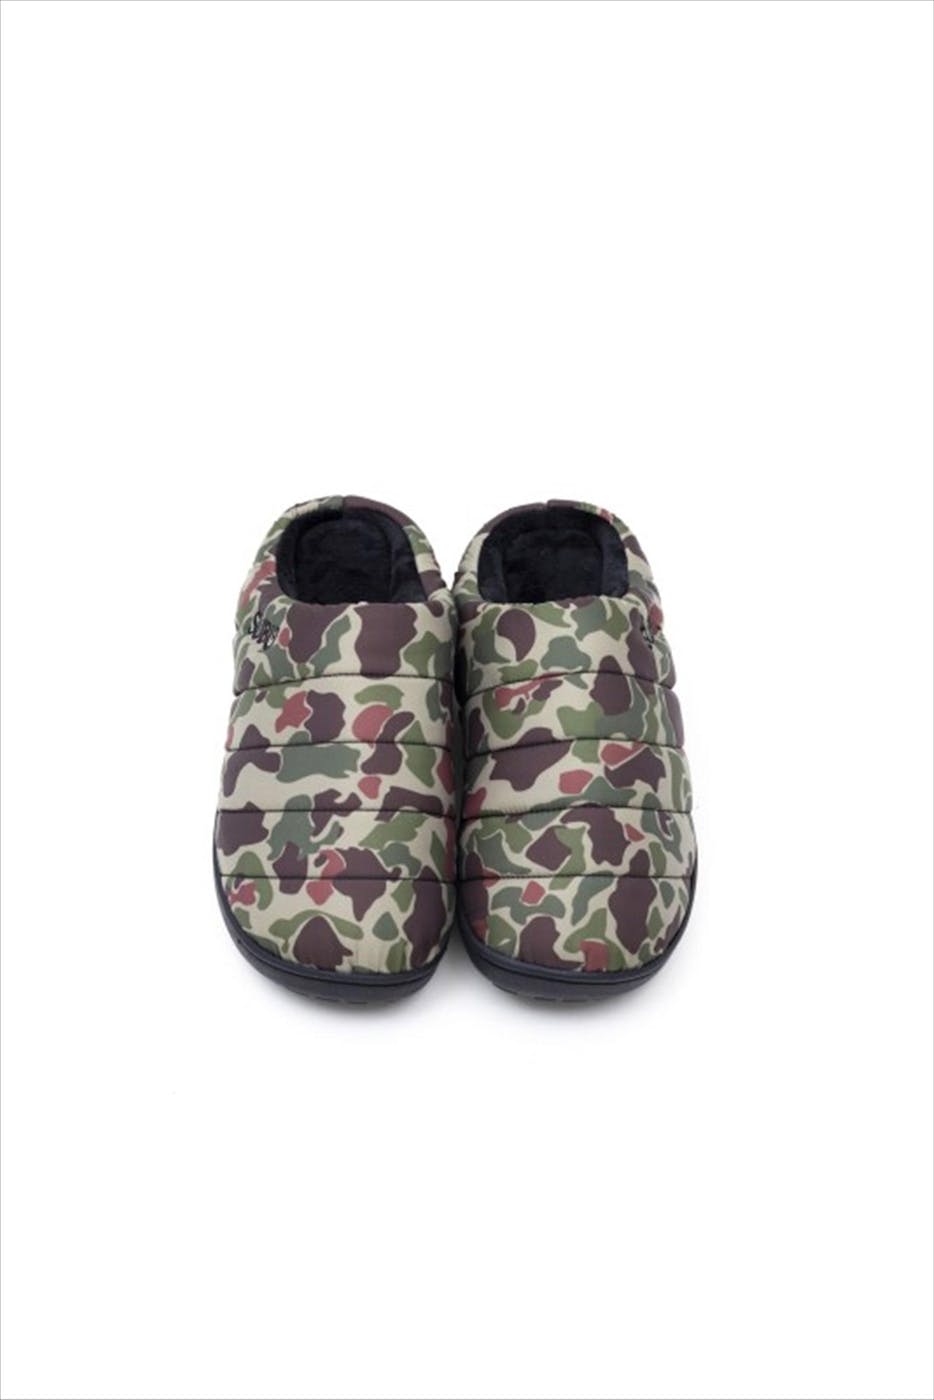 SUBU - Camouflage Permanent Collection pantoffels